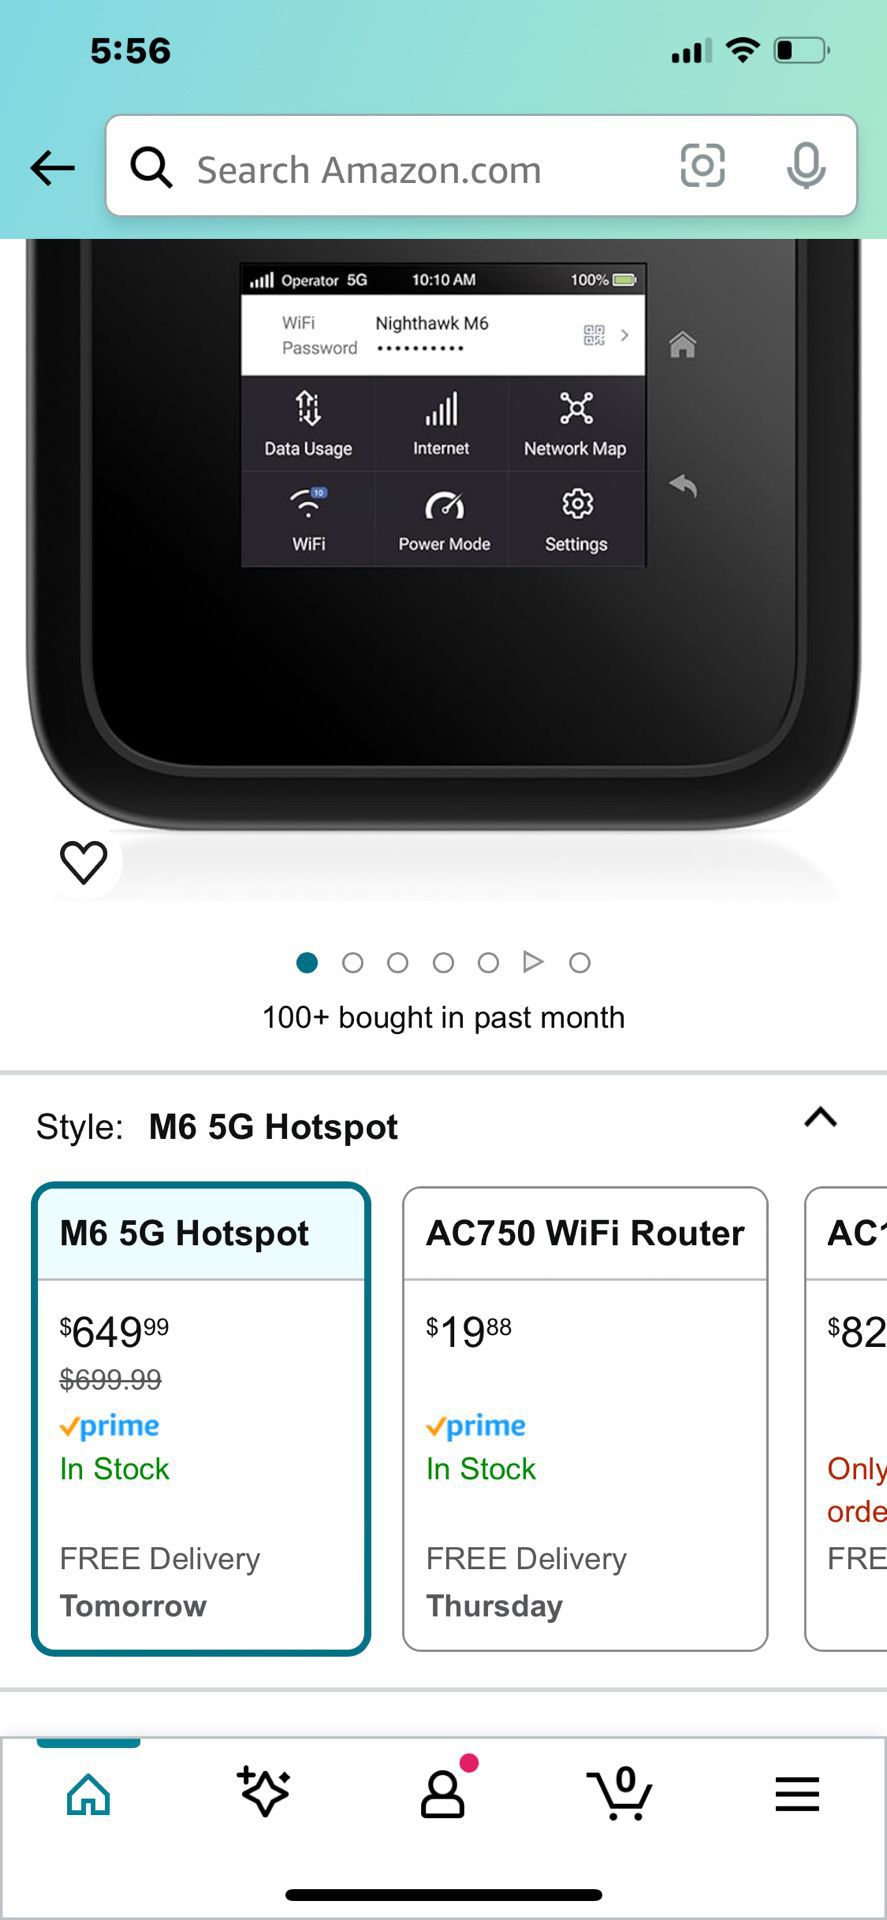 NETGEAR Nighthawk M6 5G Mobile Hotspot, 5G Router with Sim Card Slot, 5G Modem, Portable WiFi Device for Travel, Unlocked with Verizon, AT&T, and T-Mo